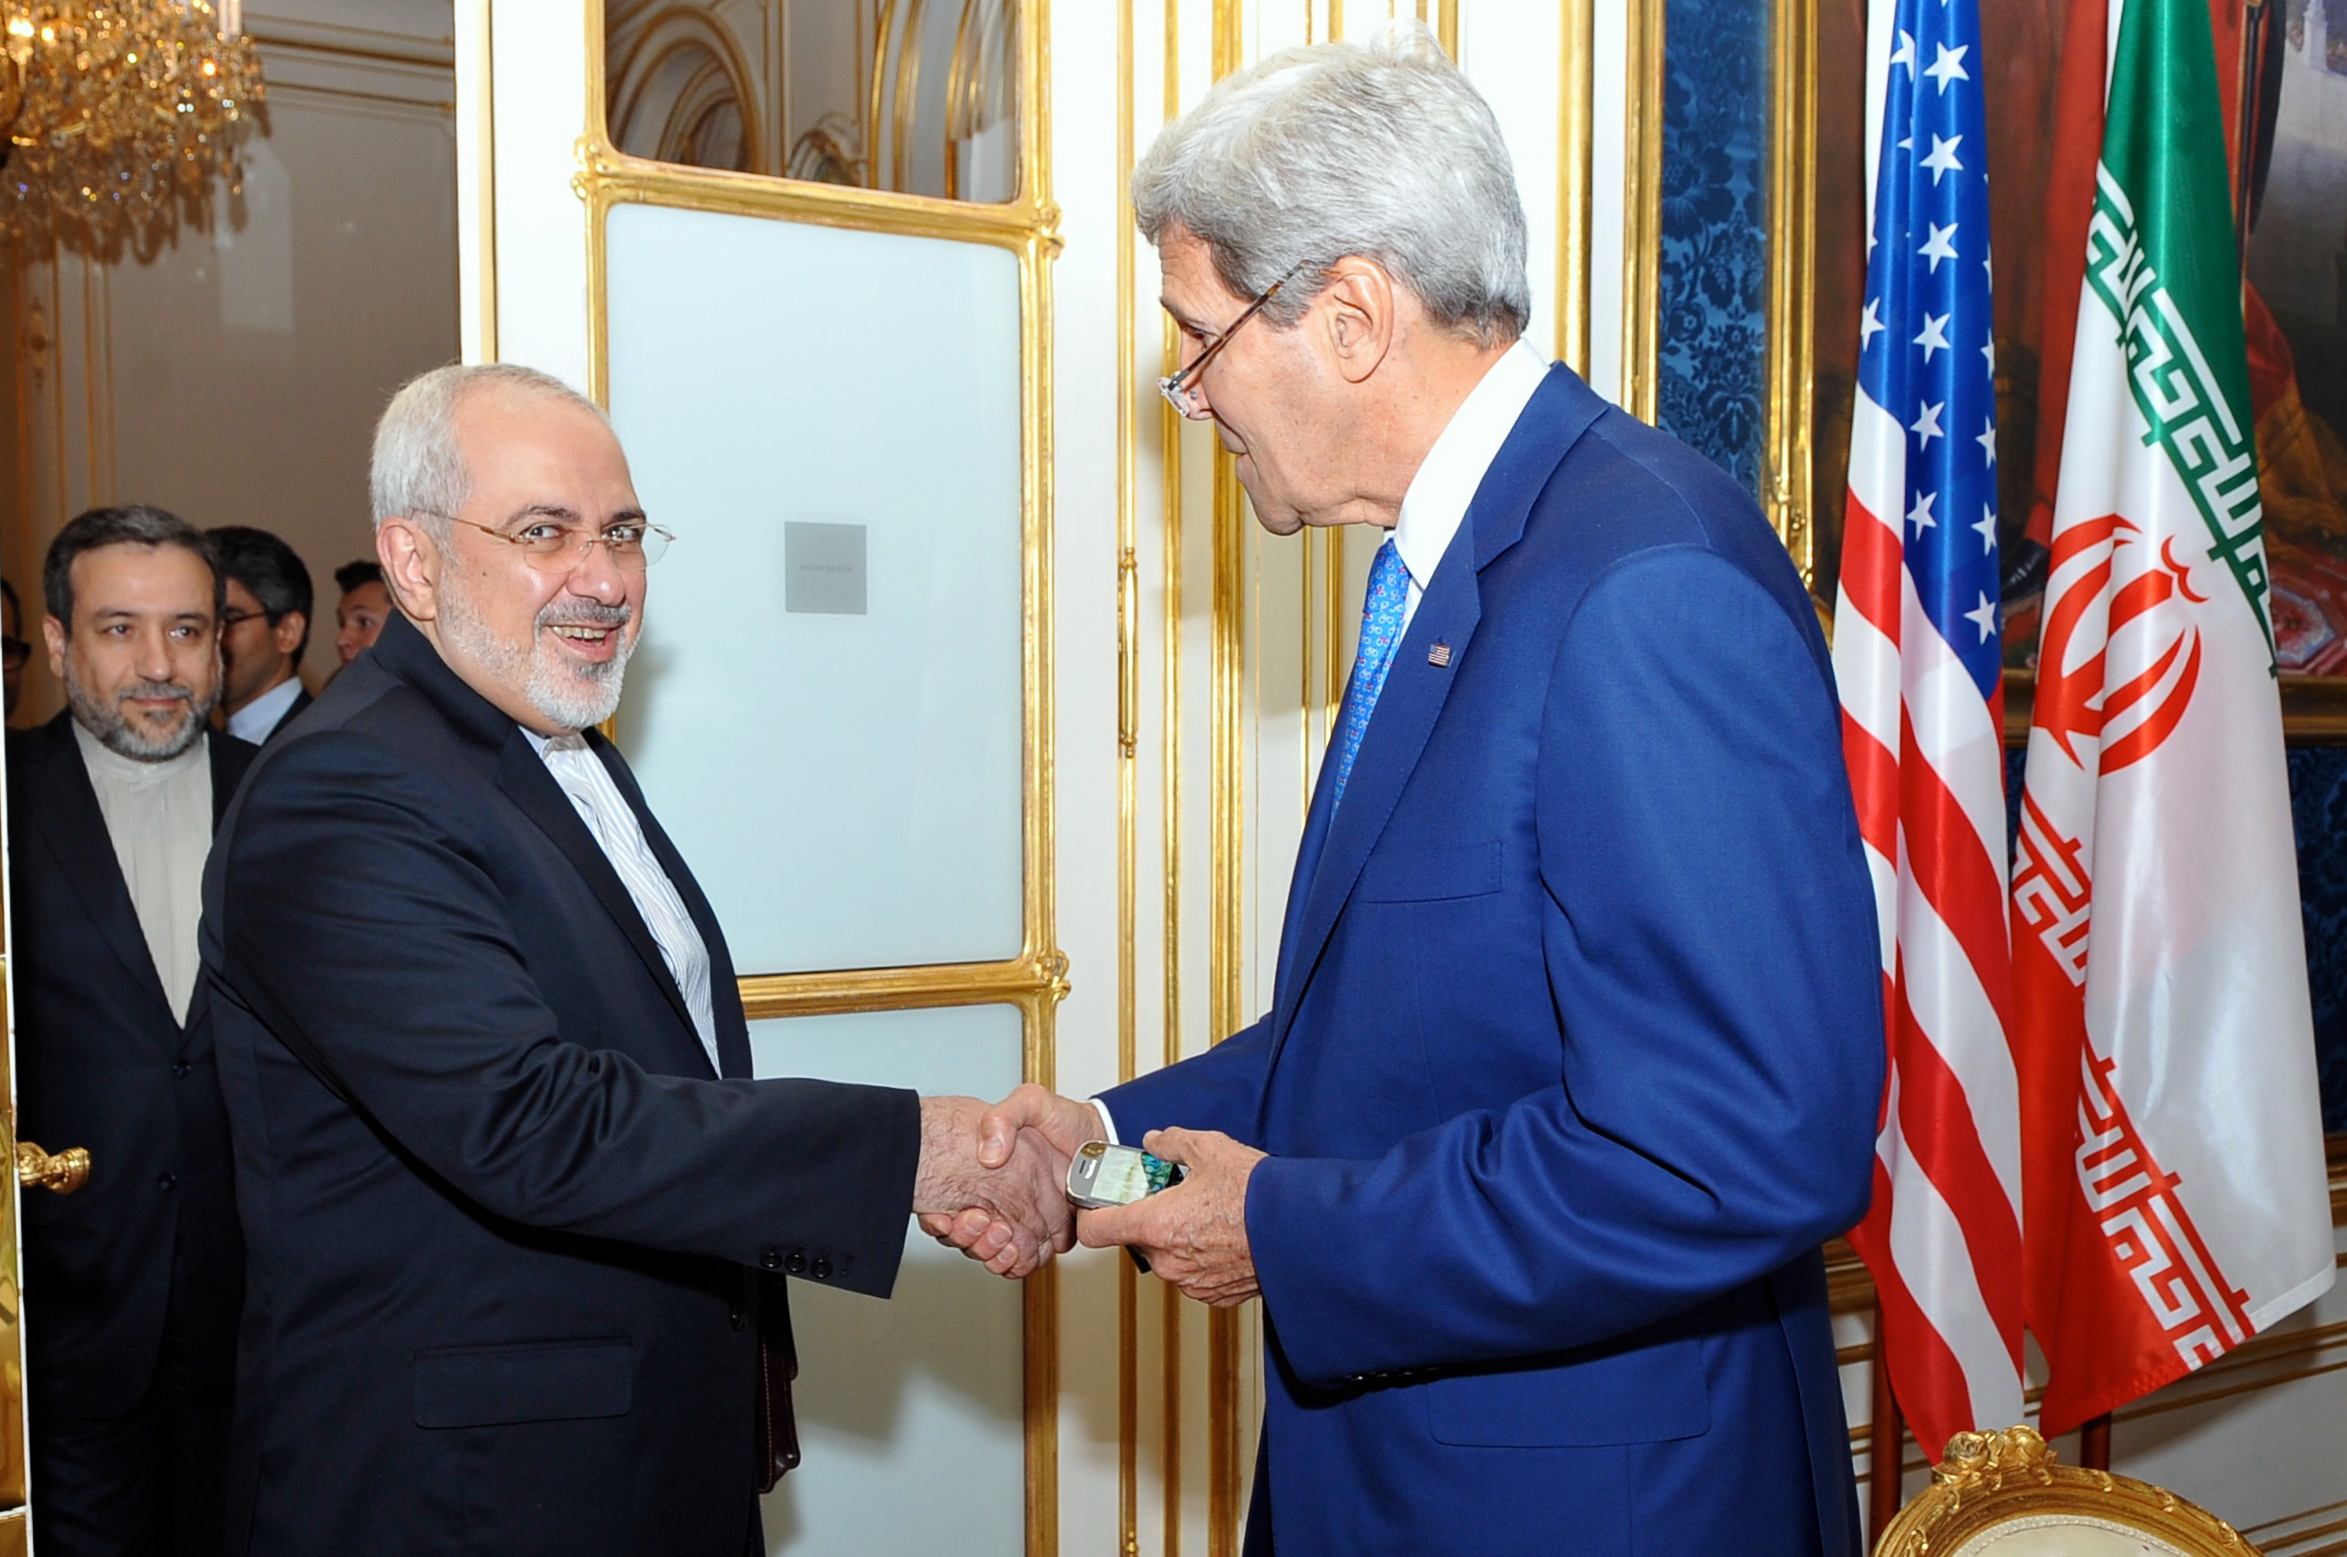 U.S. Secretary of State John Kerry shakes hands with Iranian Foreign Minister Mohammad Javad Zarif as he arrives at a hotel in Vienna, Austria, on July 14, 2014, for a second day of meetings about the future of his country's nuclear program. US State Dept. Photo